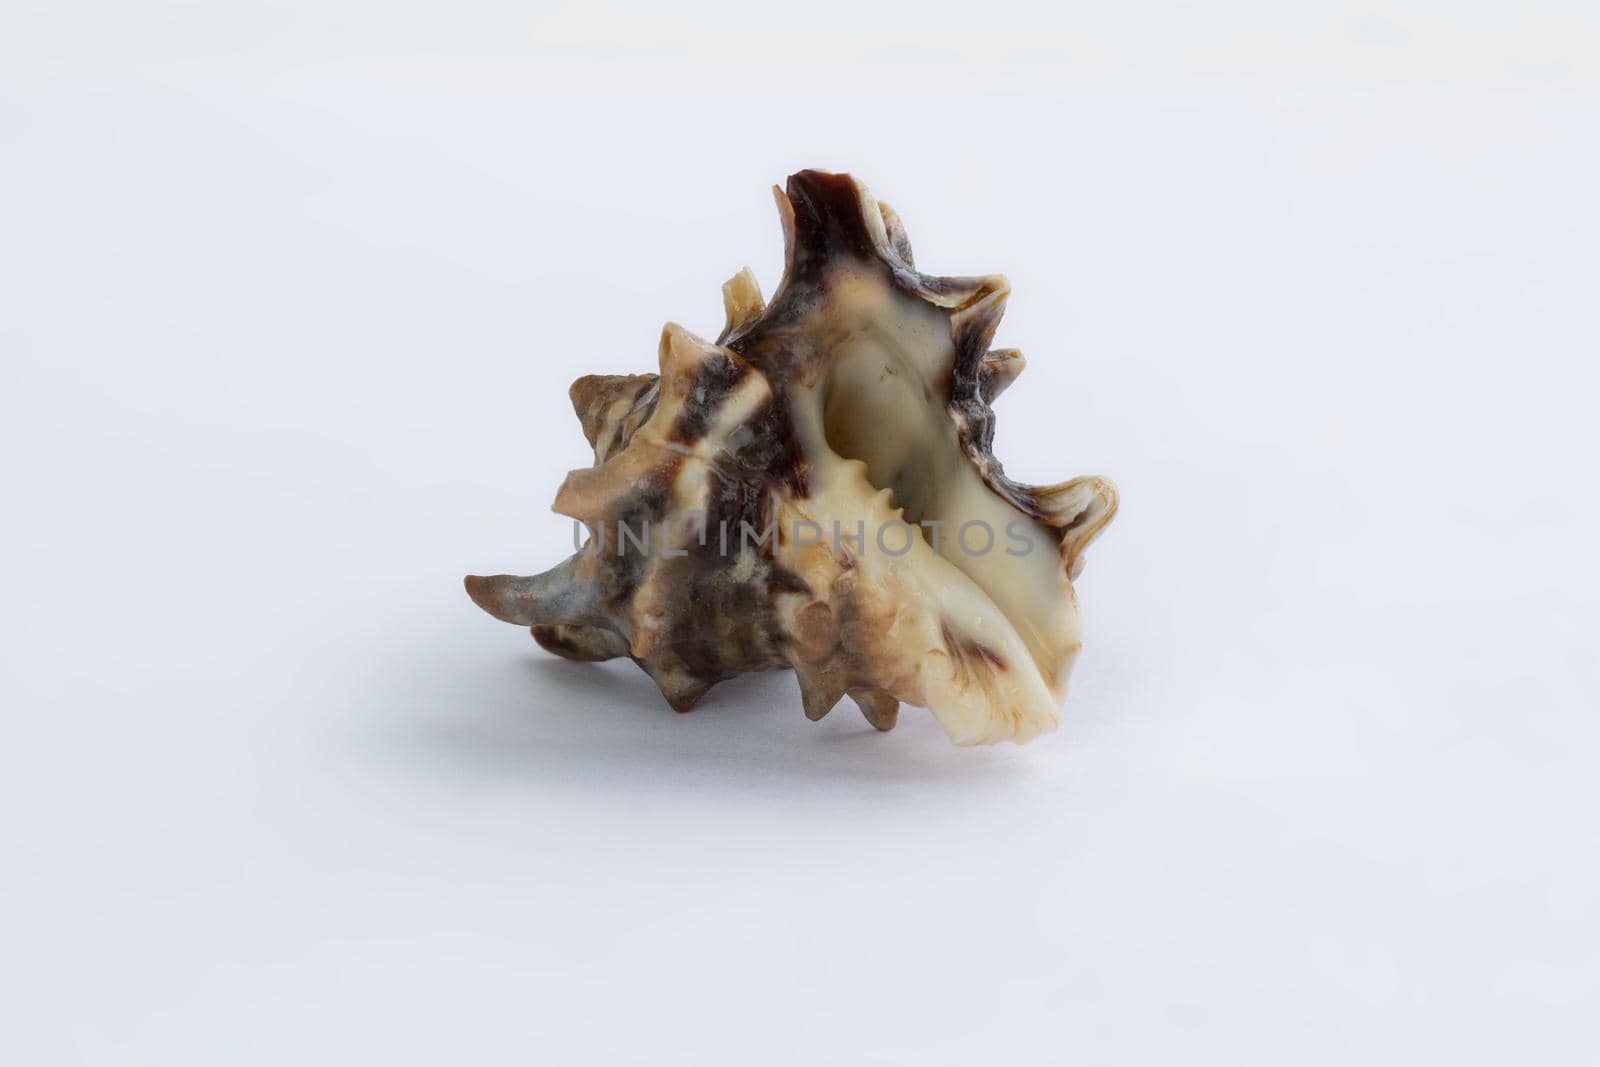 Marine life: light brown spiny itchy gastropod seashell close-up on white background